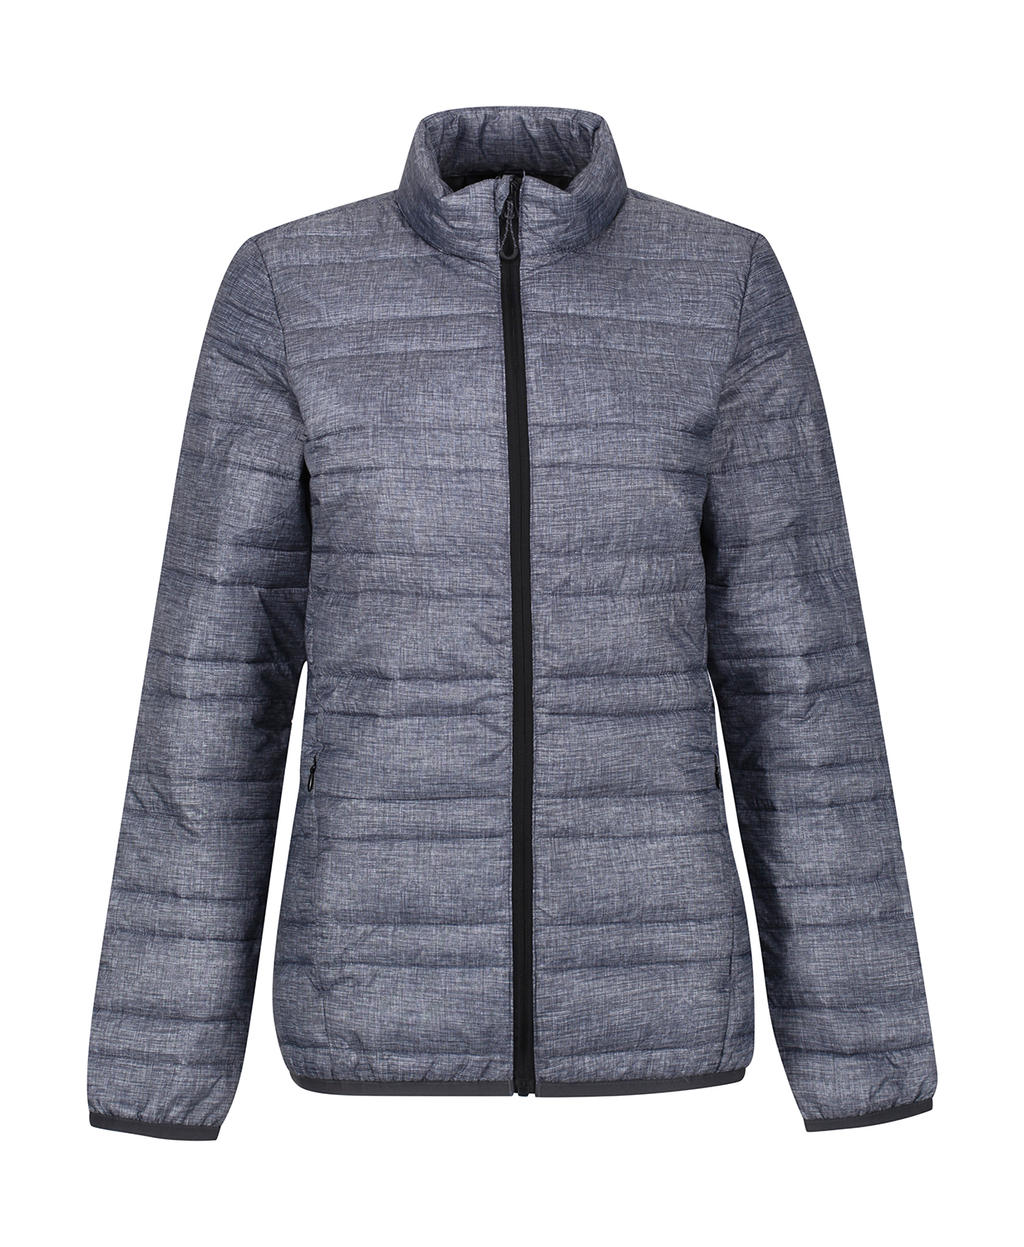  Womens Firedown Down-Touch Jacket in Farbe Seal Grey/Black